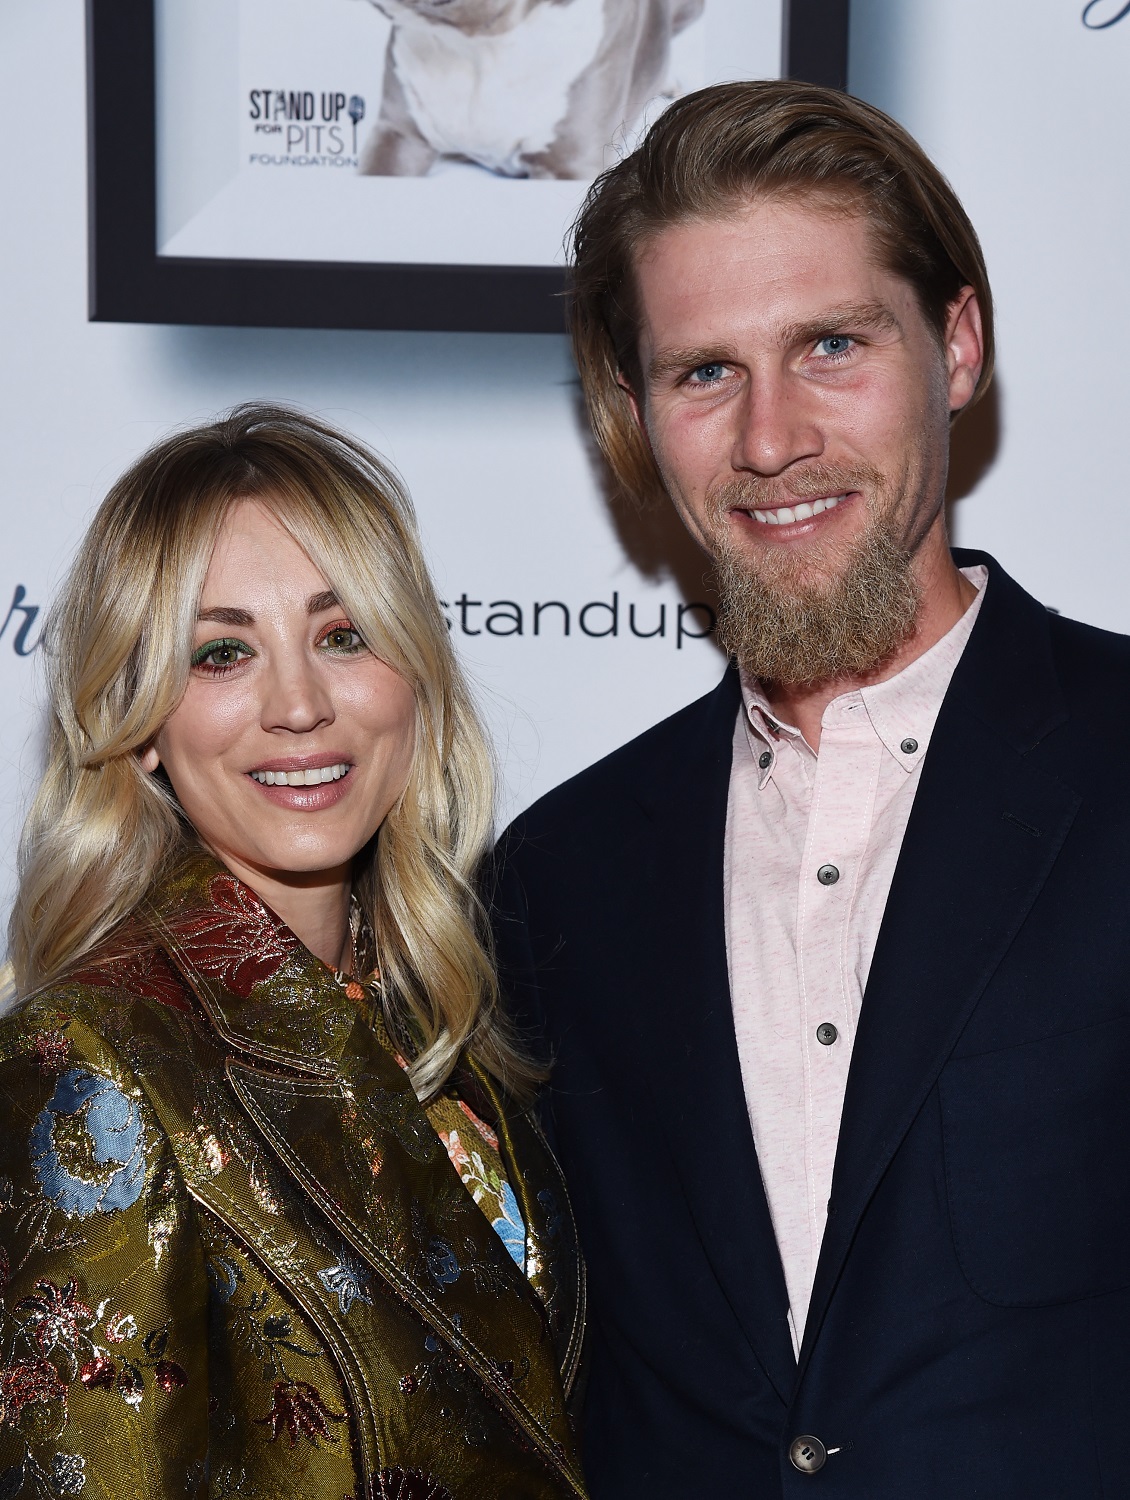 Kaley Cuoco and Karl Cook arrive at the 9th Annual Stand Up For Pits event 